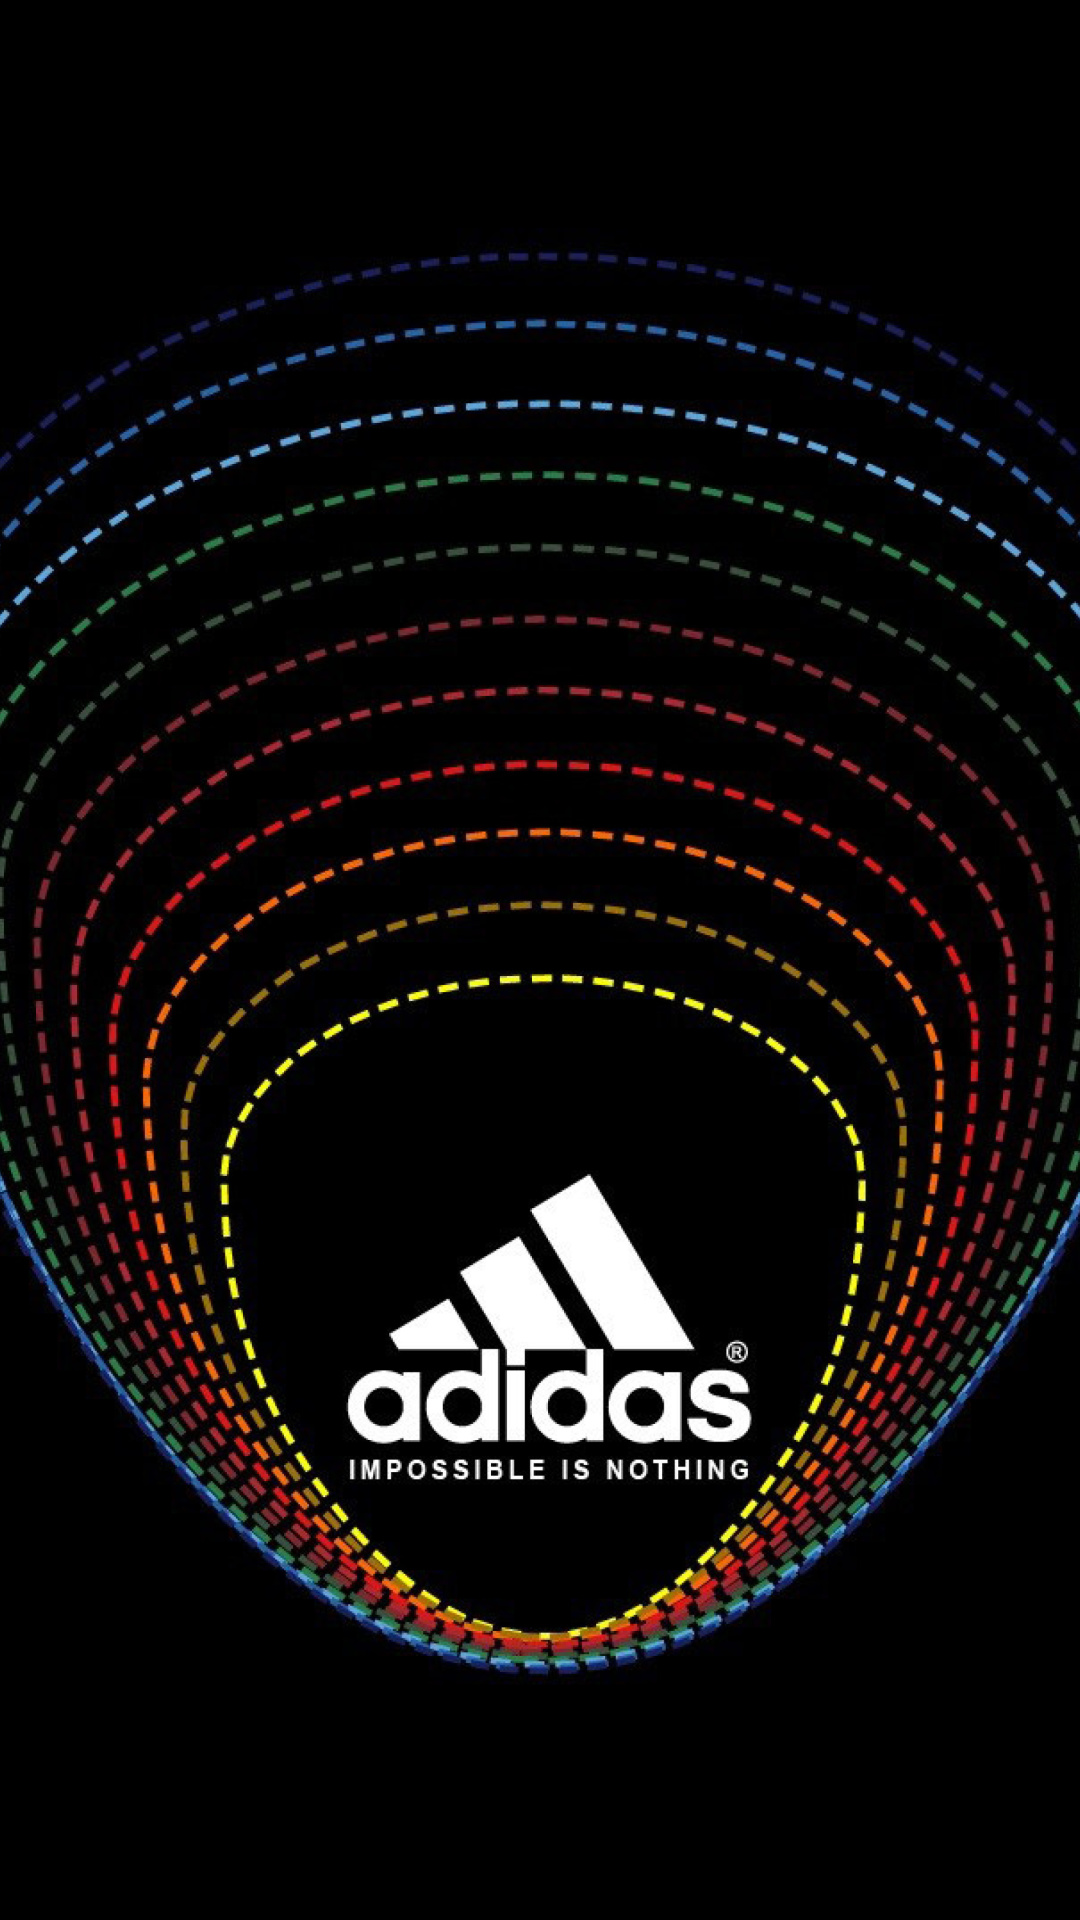 Adidas Tagline, Impossible is Nothing screenshot #1 1080x1920